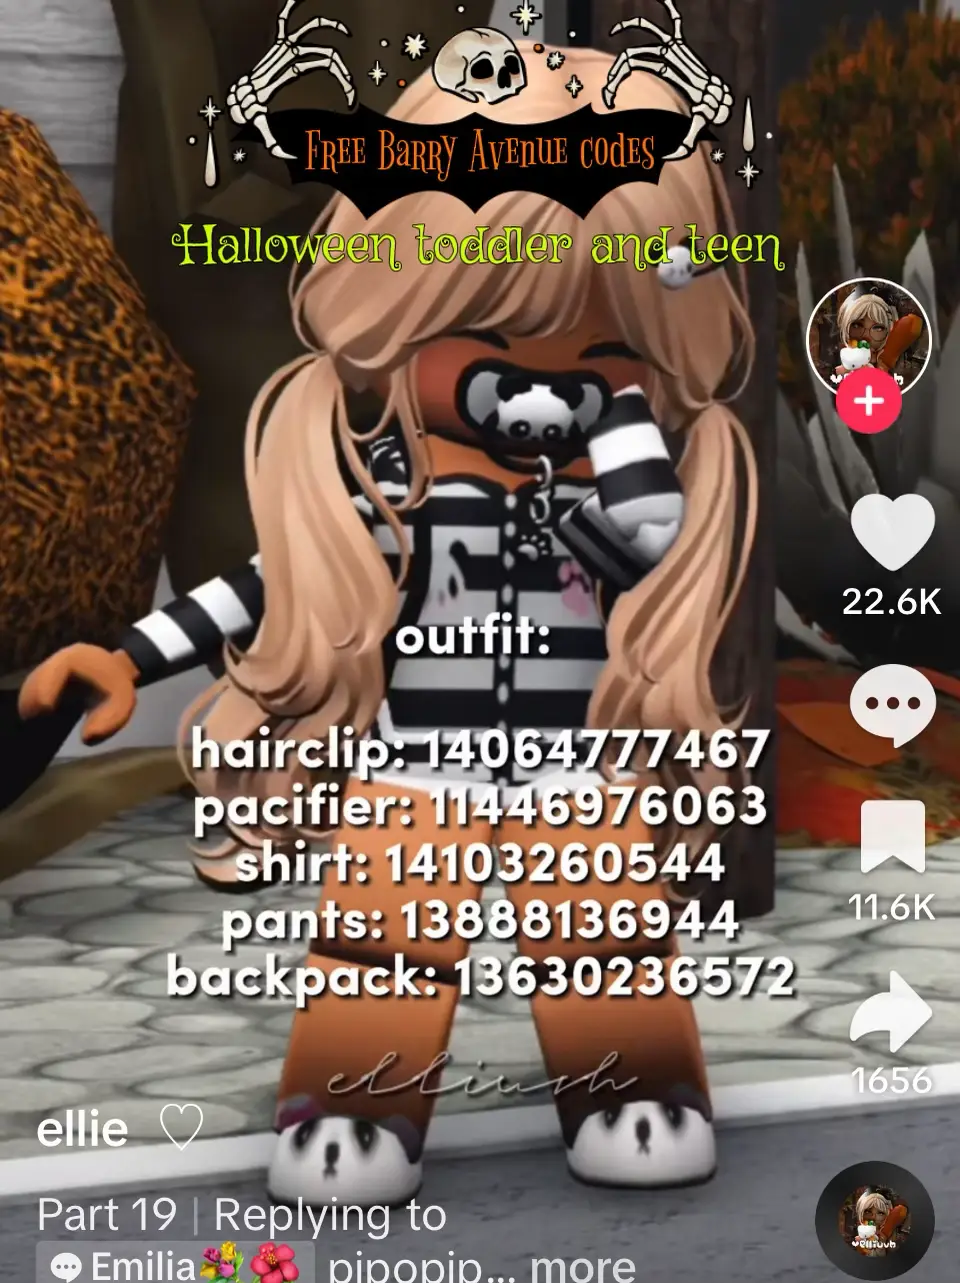 Bloxburg Halloween Costume Codes, Check Out The List Of Halloween Costume  Codes - News